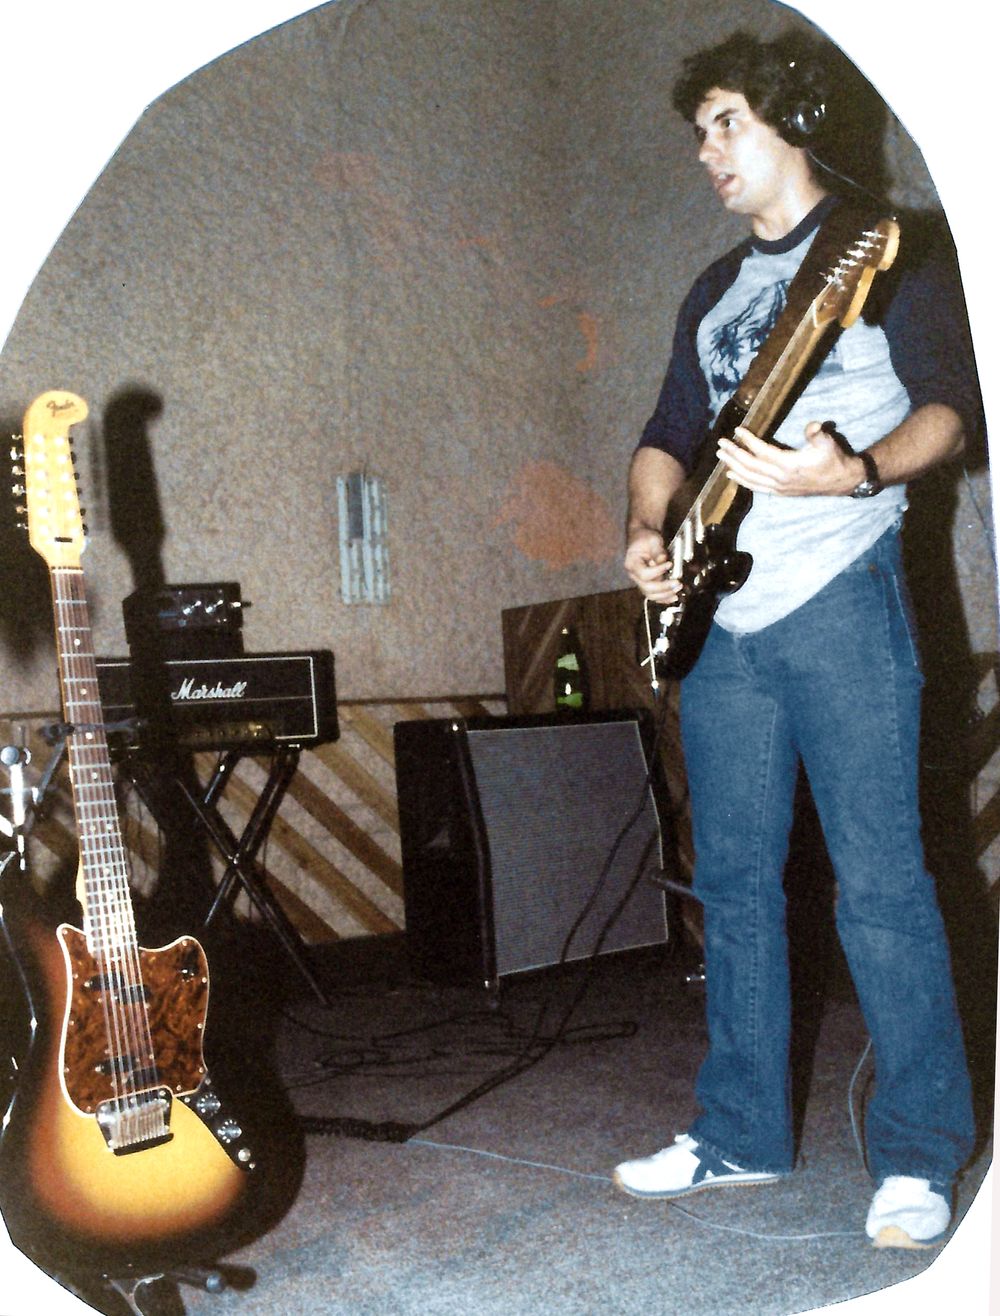 Danny Kristensen about 30 seconds from recording his classic lead on the outro of "Terminally Hip", November 1981